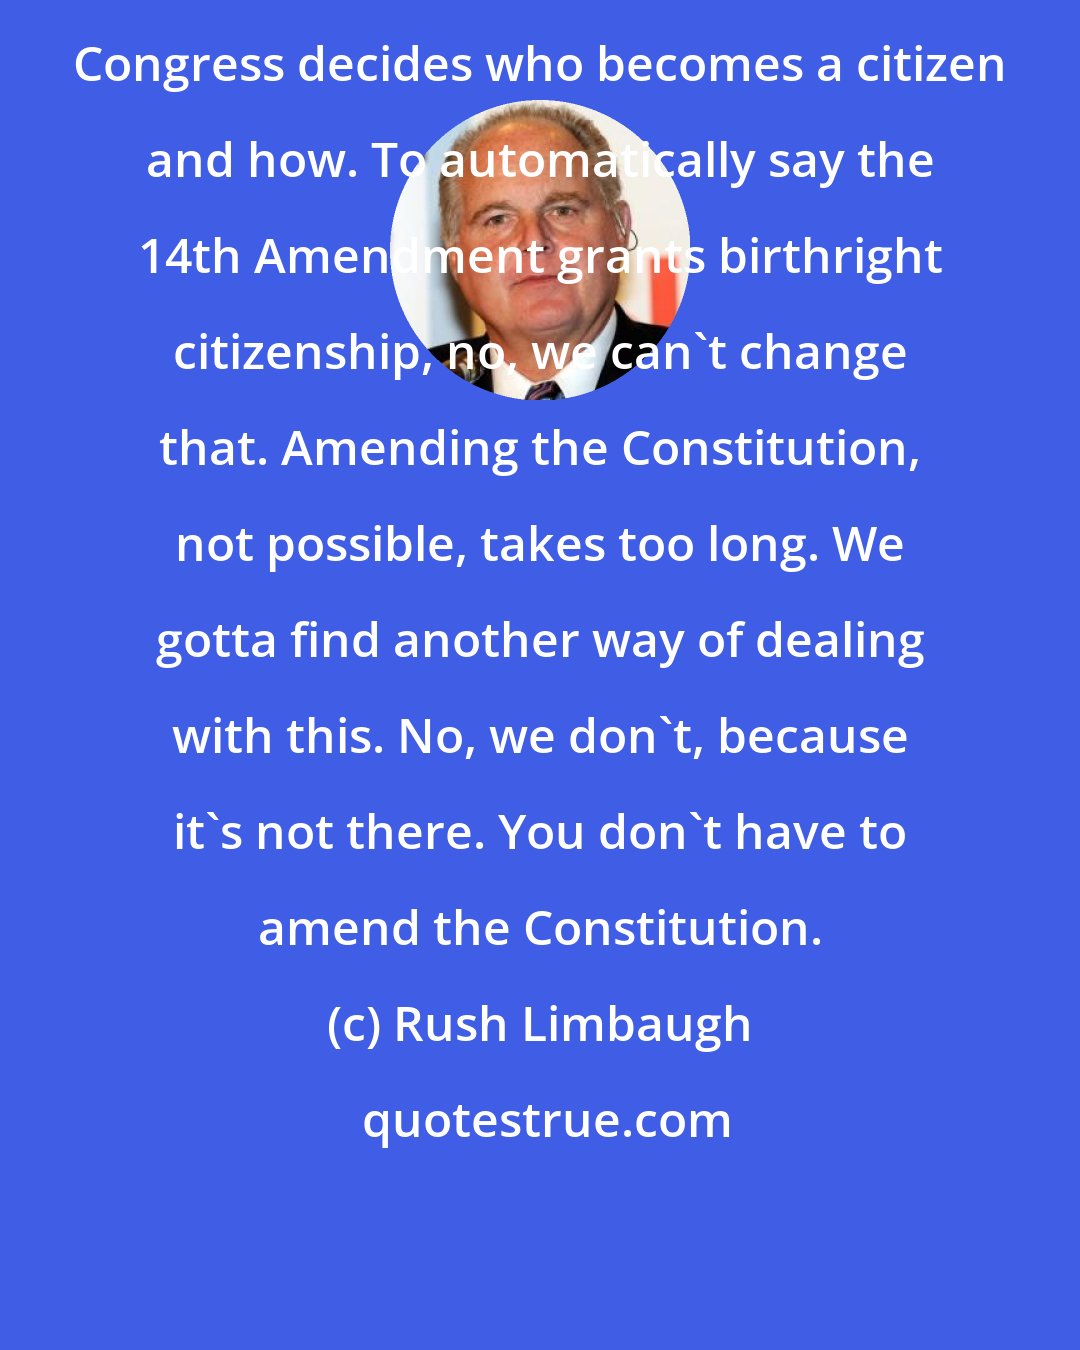 Rush Limbaugh: Congress decides who becomes a citizen and how. To automatically say the 14th Amendment grants birthright citizenship, no, we can't change that. Amending the Constitution, not possible, takes too long. We gotta find another way of dealing with this. No, we don't, because it's not there. You don't have to amend the Constitution.